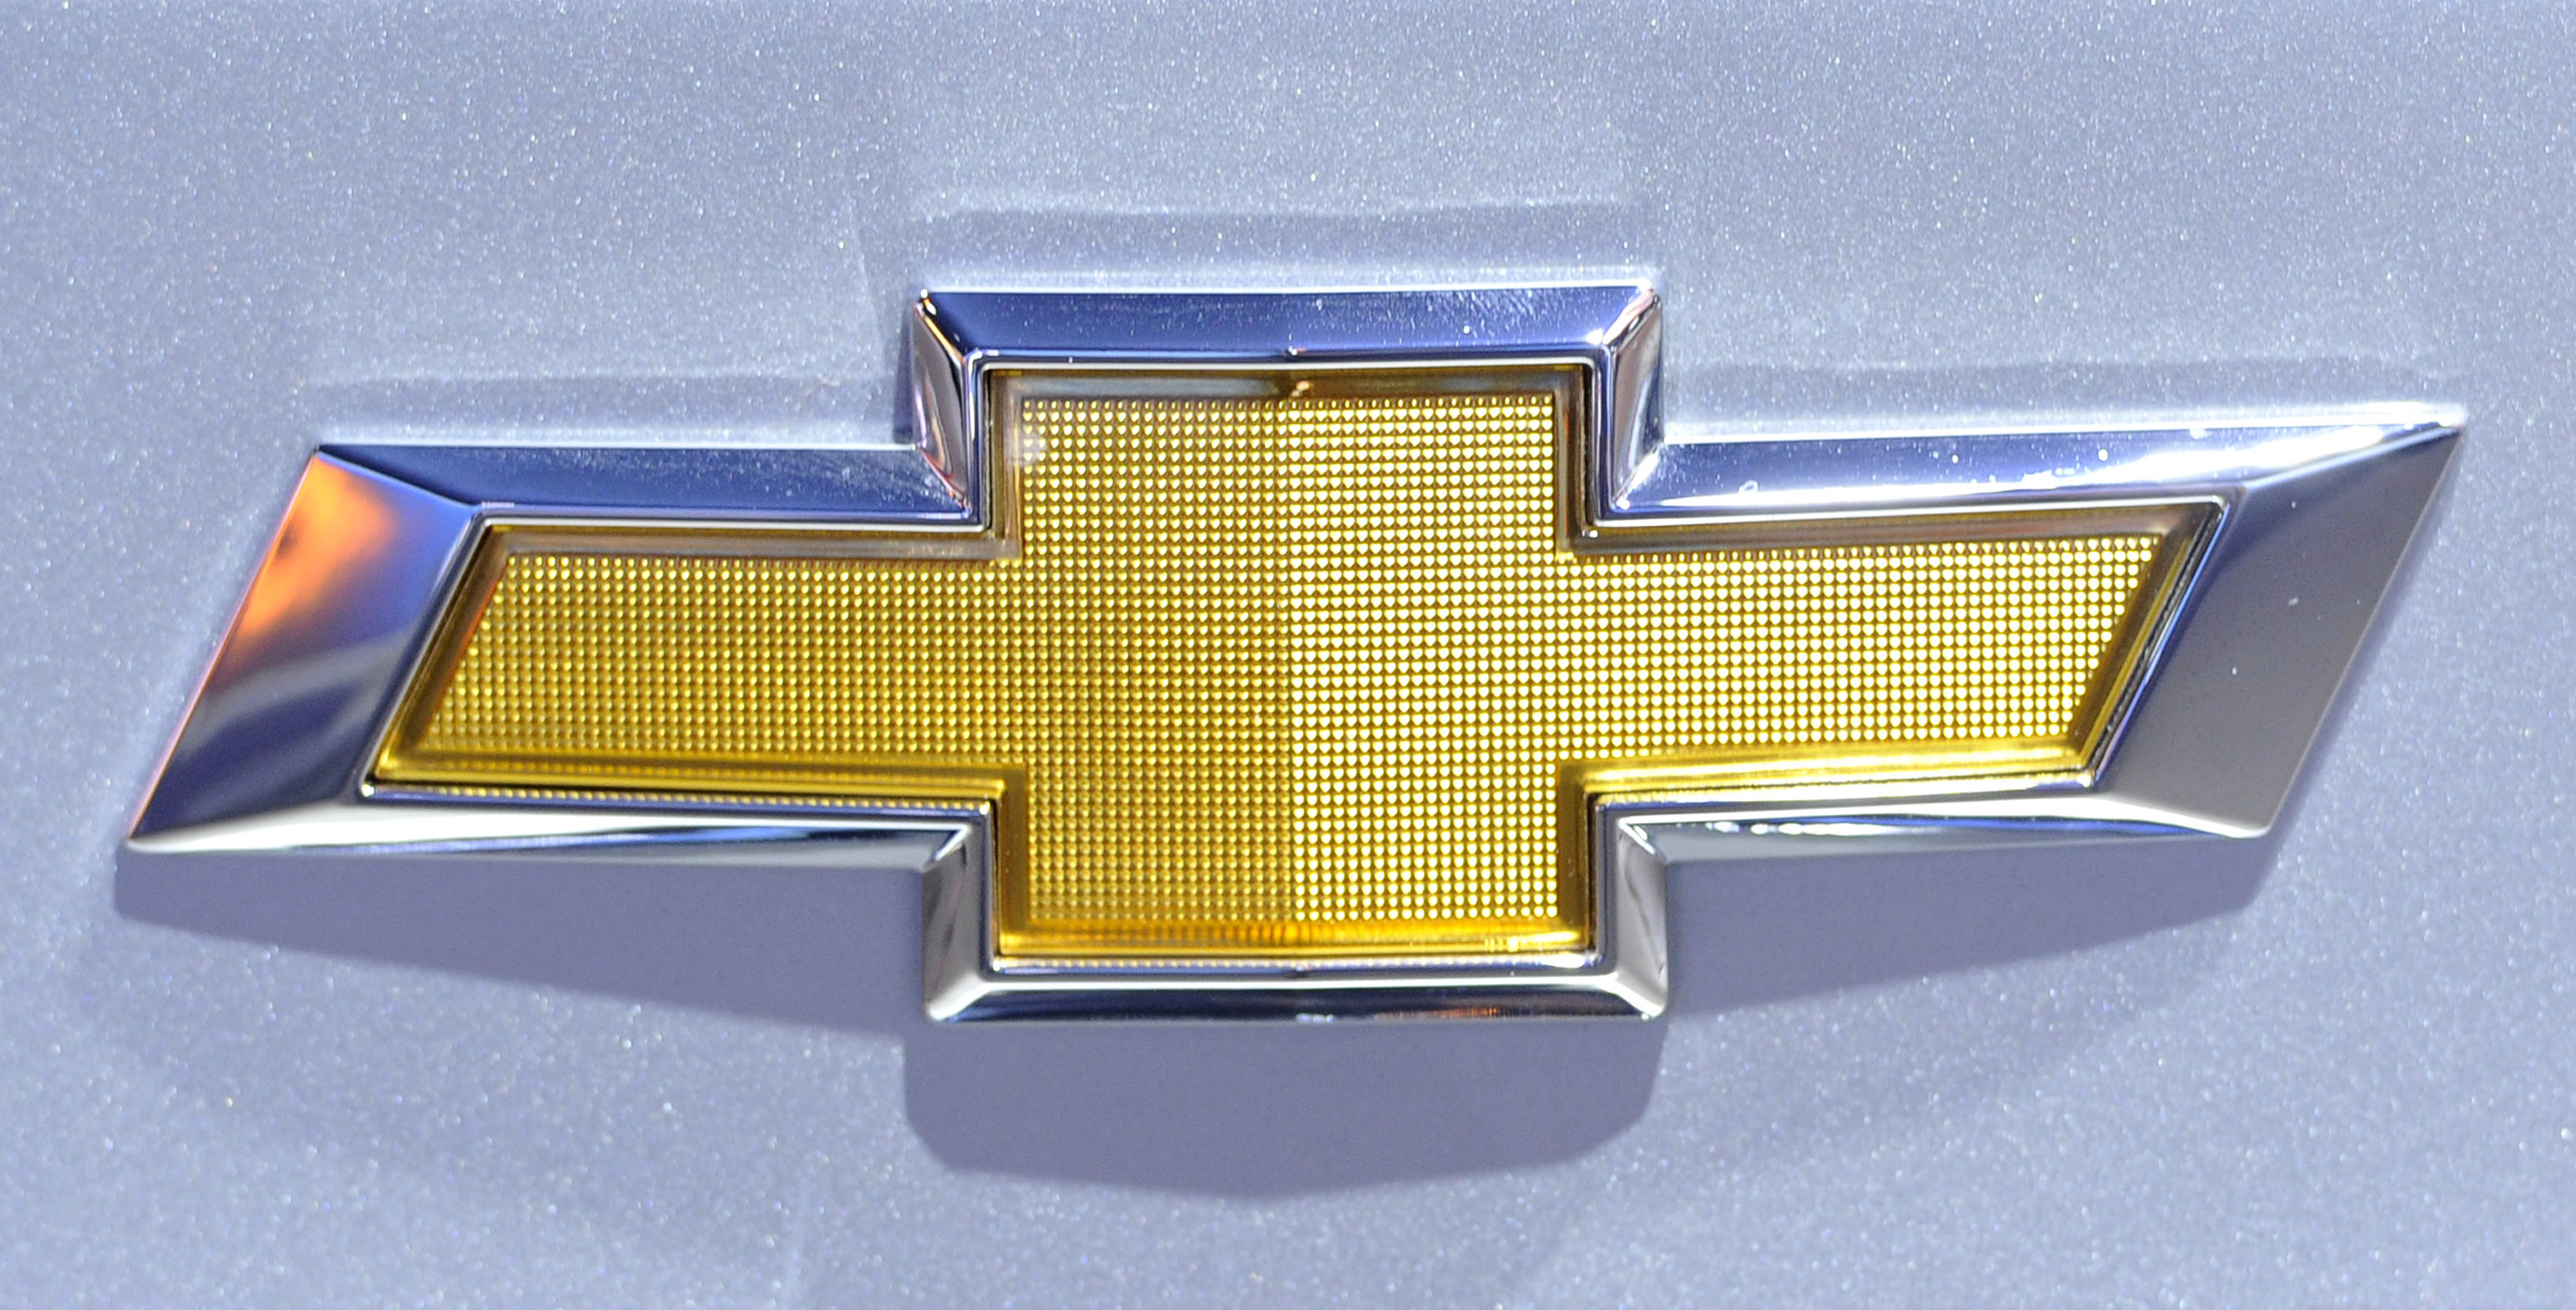 3000x1526 The logo for Chevrolet on display at the Chicago Auto Show